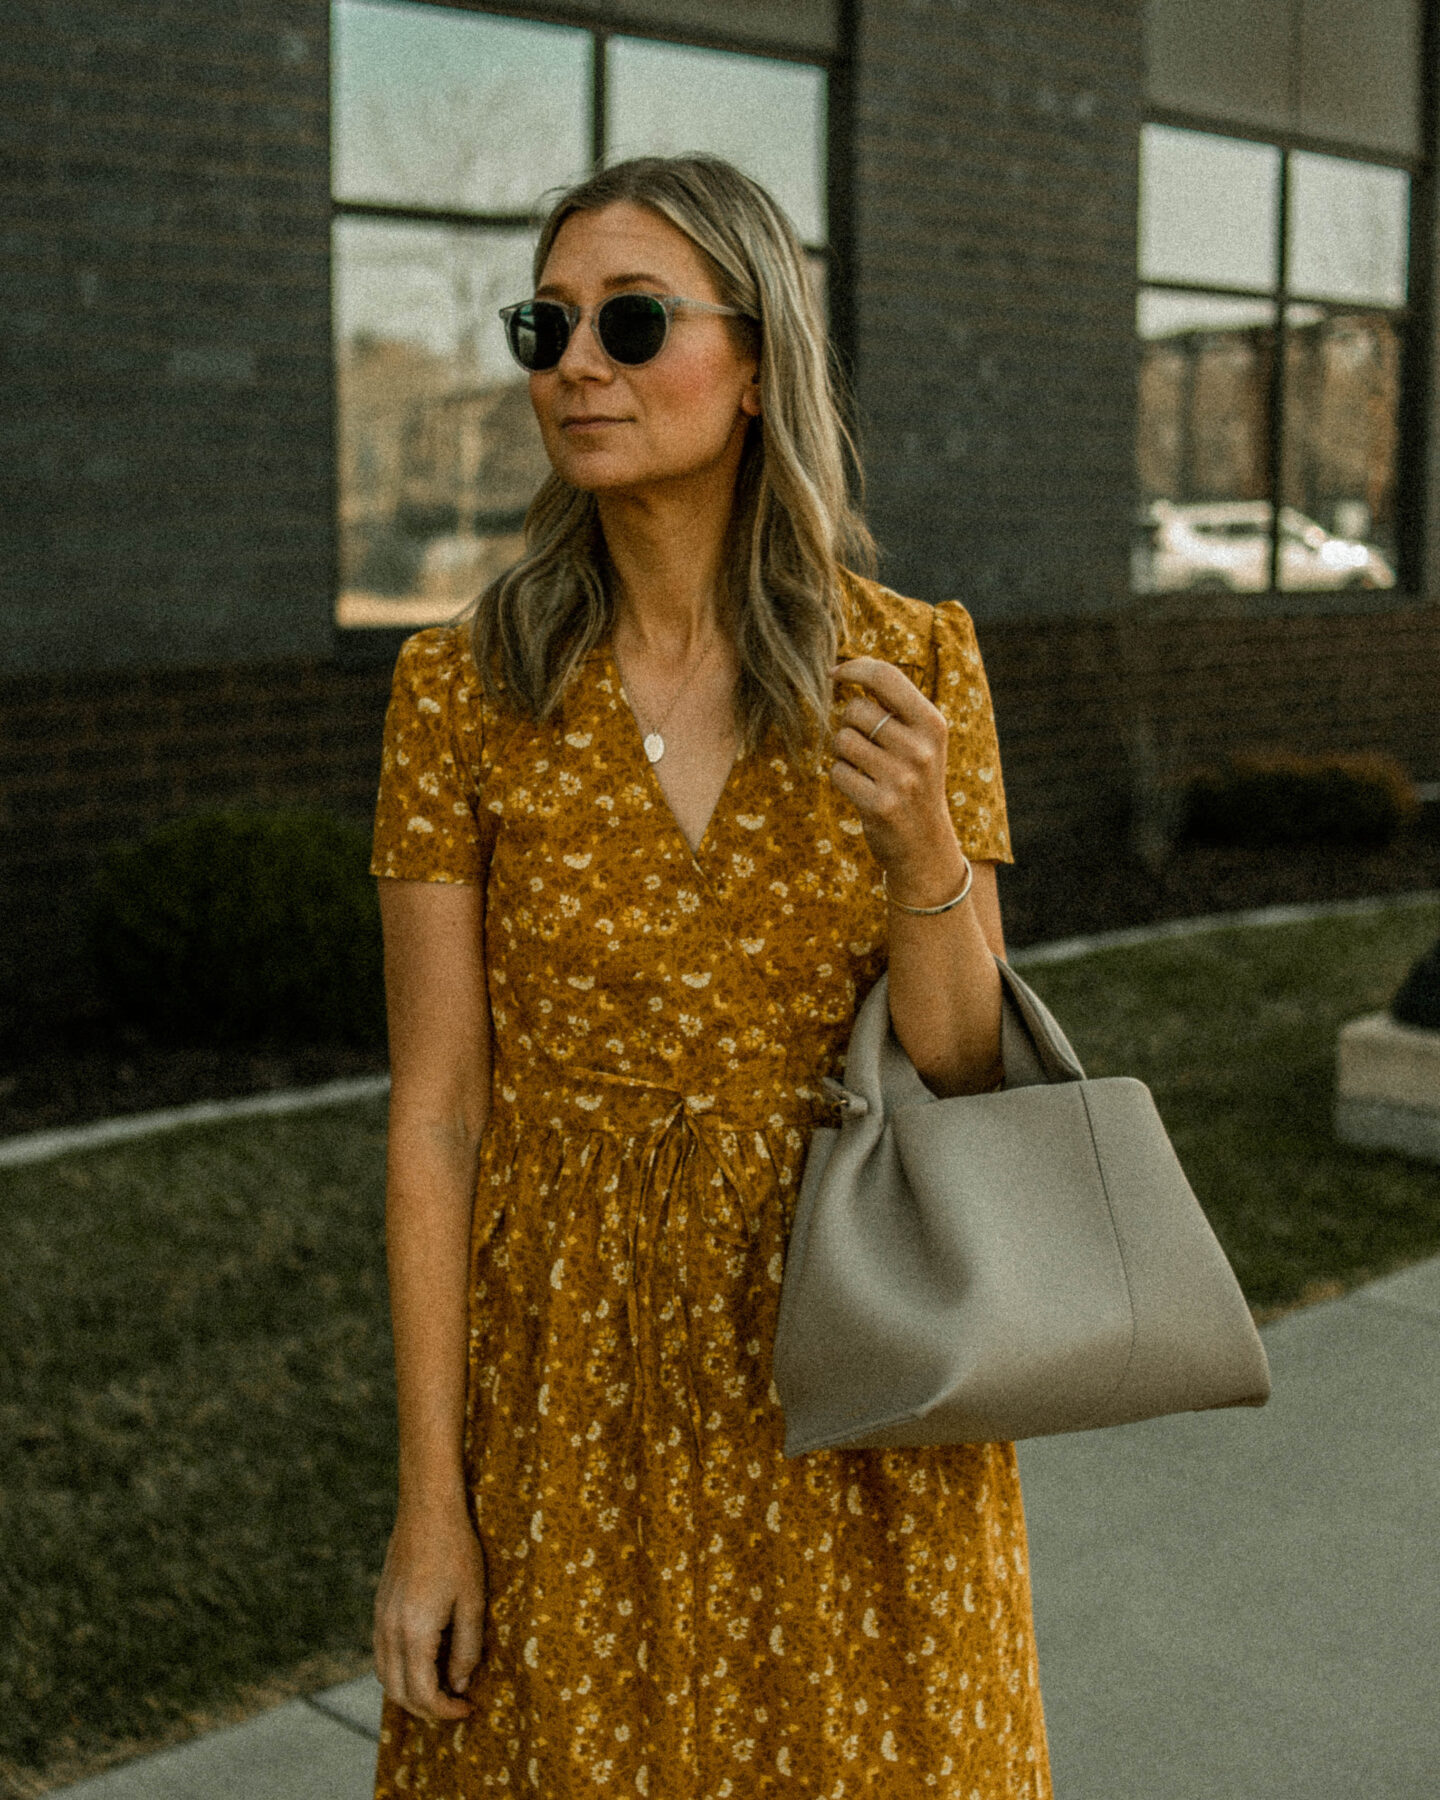 My Favorite Summer Dress + How I'm Styling Them